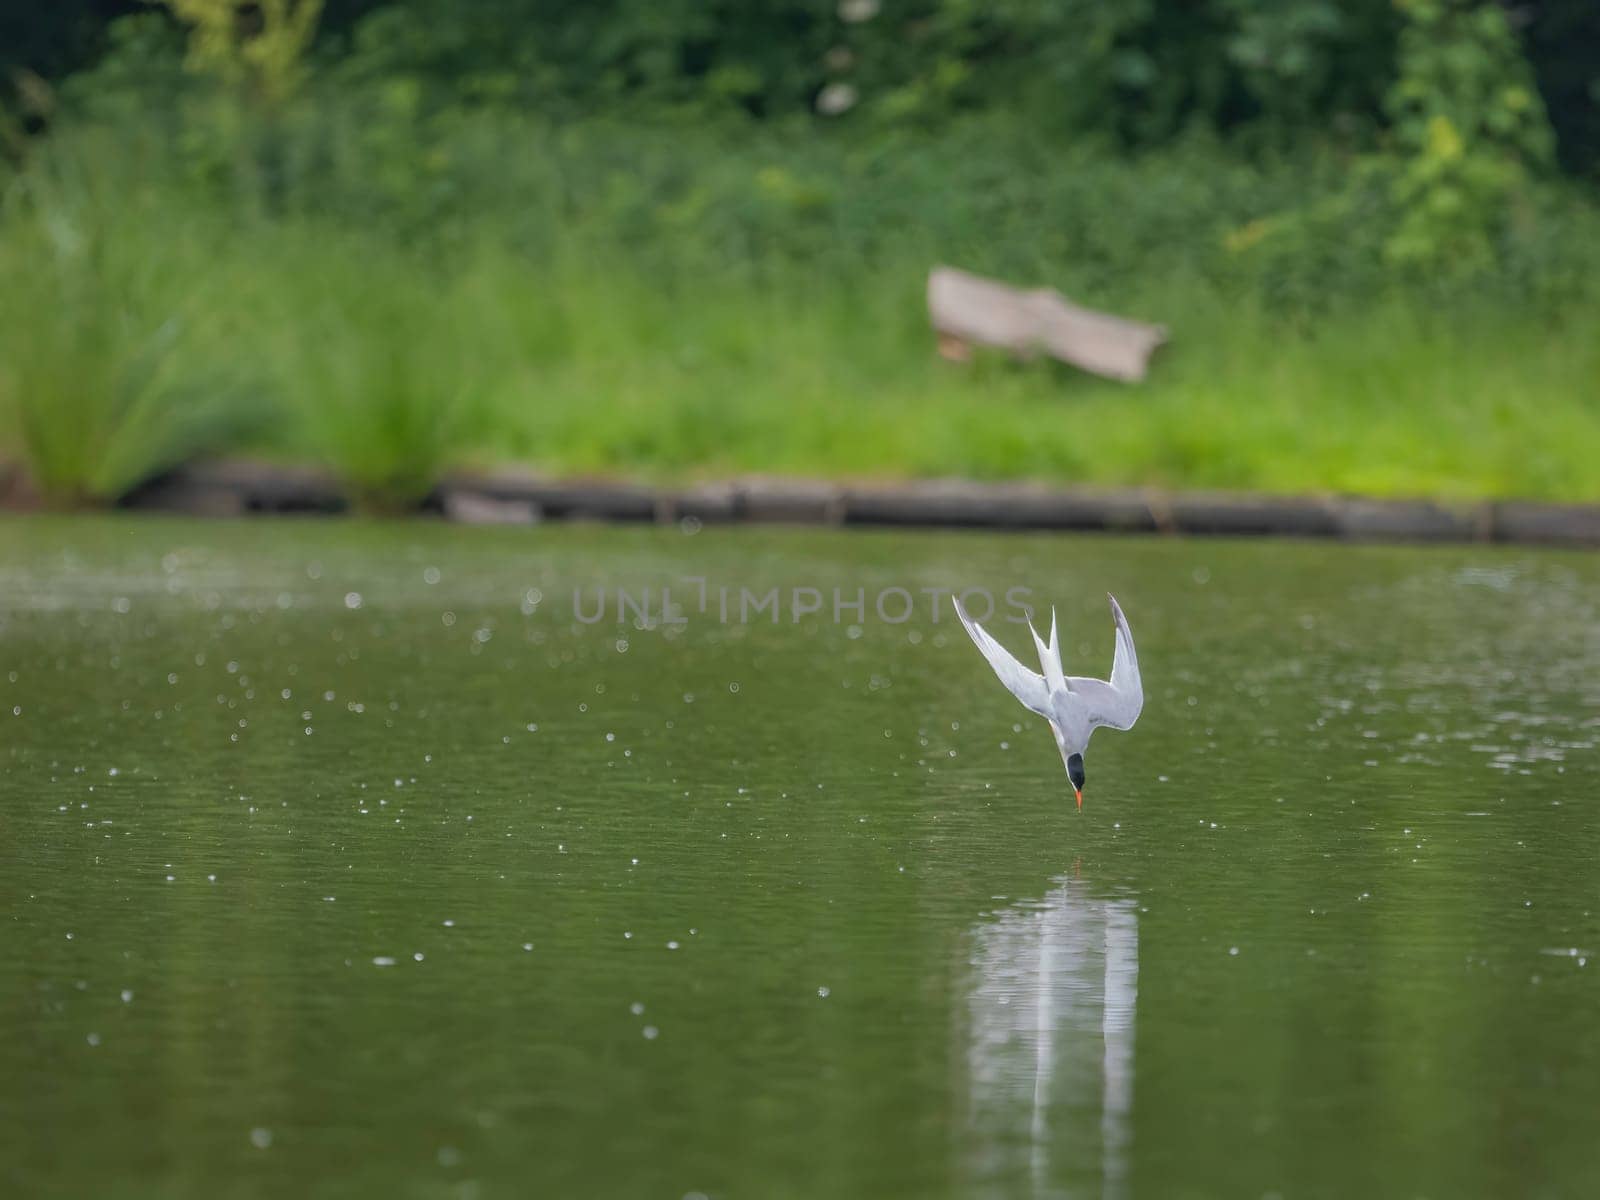 A Common Tern gracefully gliding through the air above the shimmering water, its wings outstretched as it searches for its next meal.